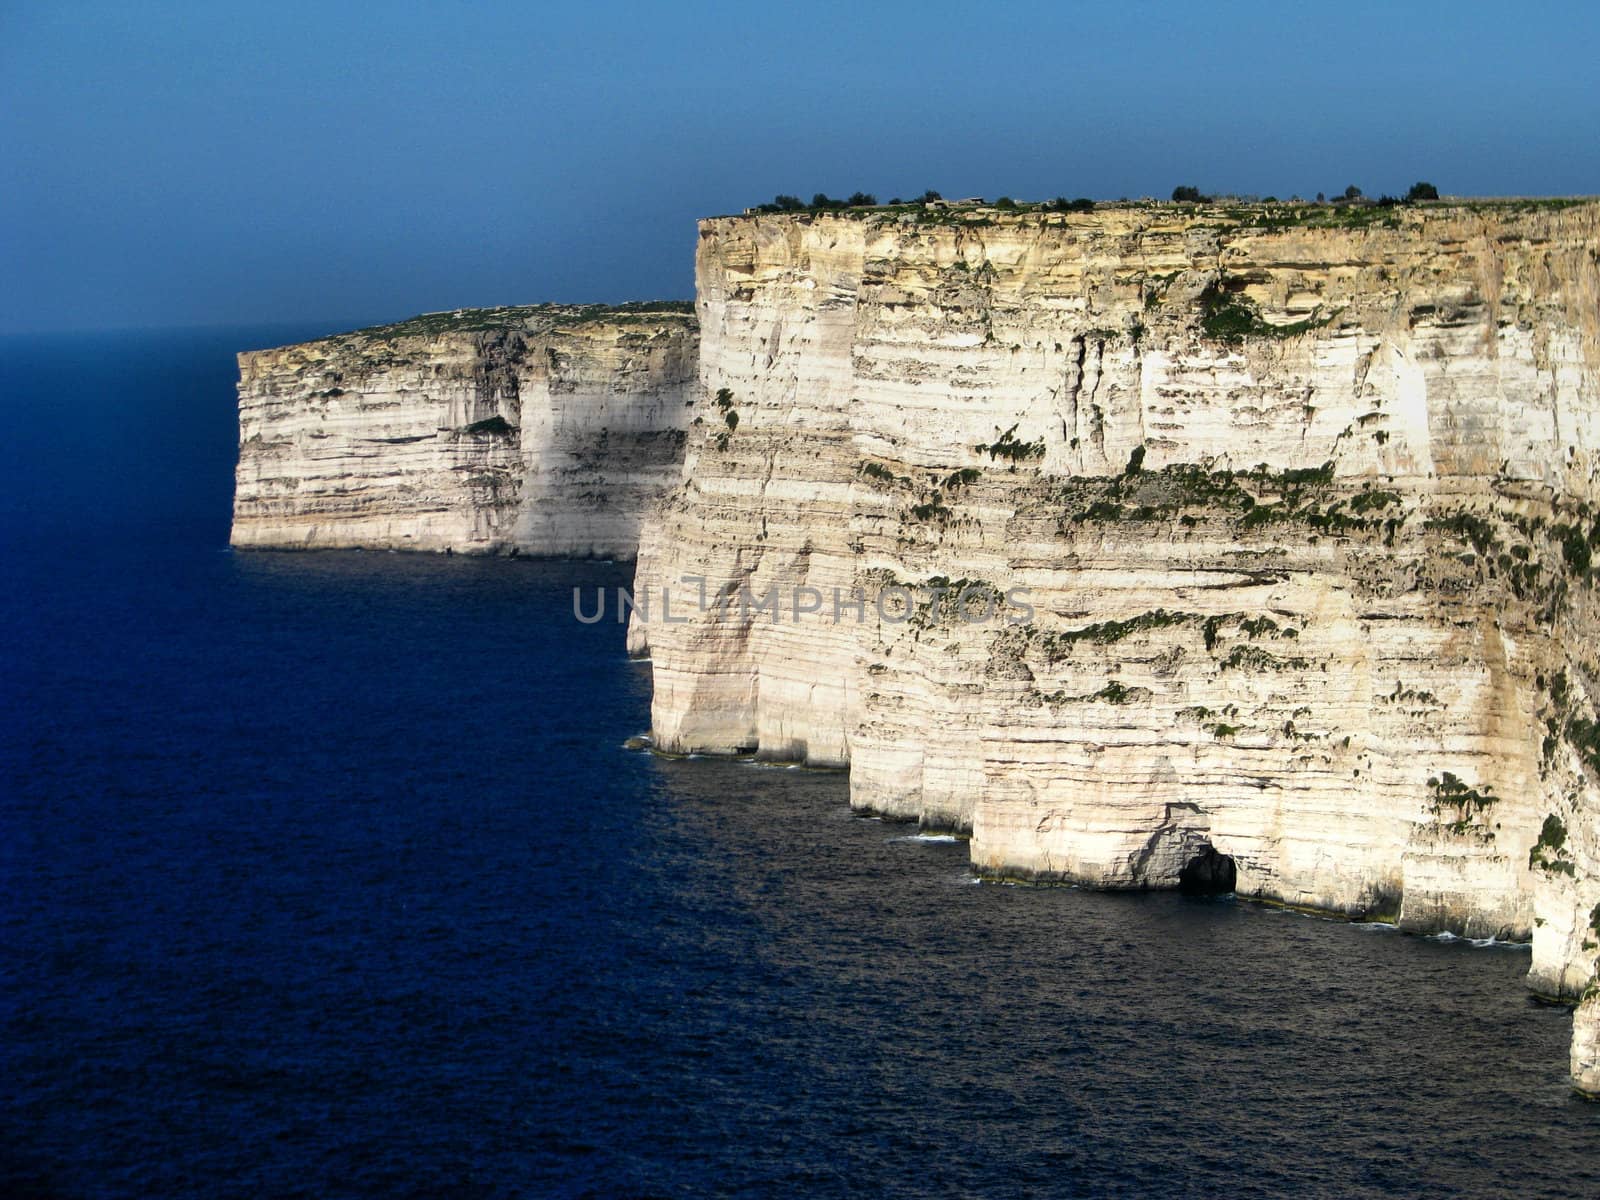 Beyond the village of Sannat are the majestic cliffs of Ta Cenc, the highest point on Gozo, affording spectacular views and great for coastal walks. The cliffs at Ta Cenc are also home to some interesting archaeological sites, including the remains of a temple and some standing stones.